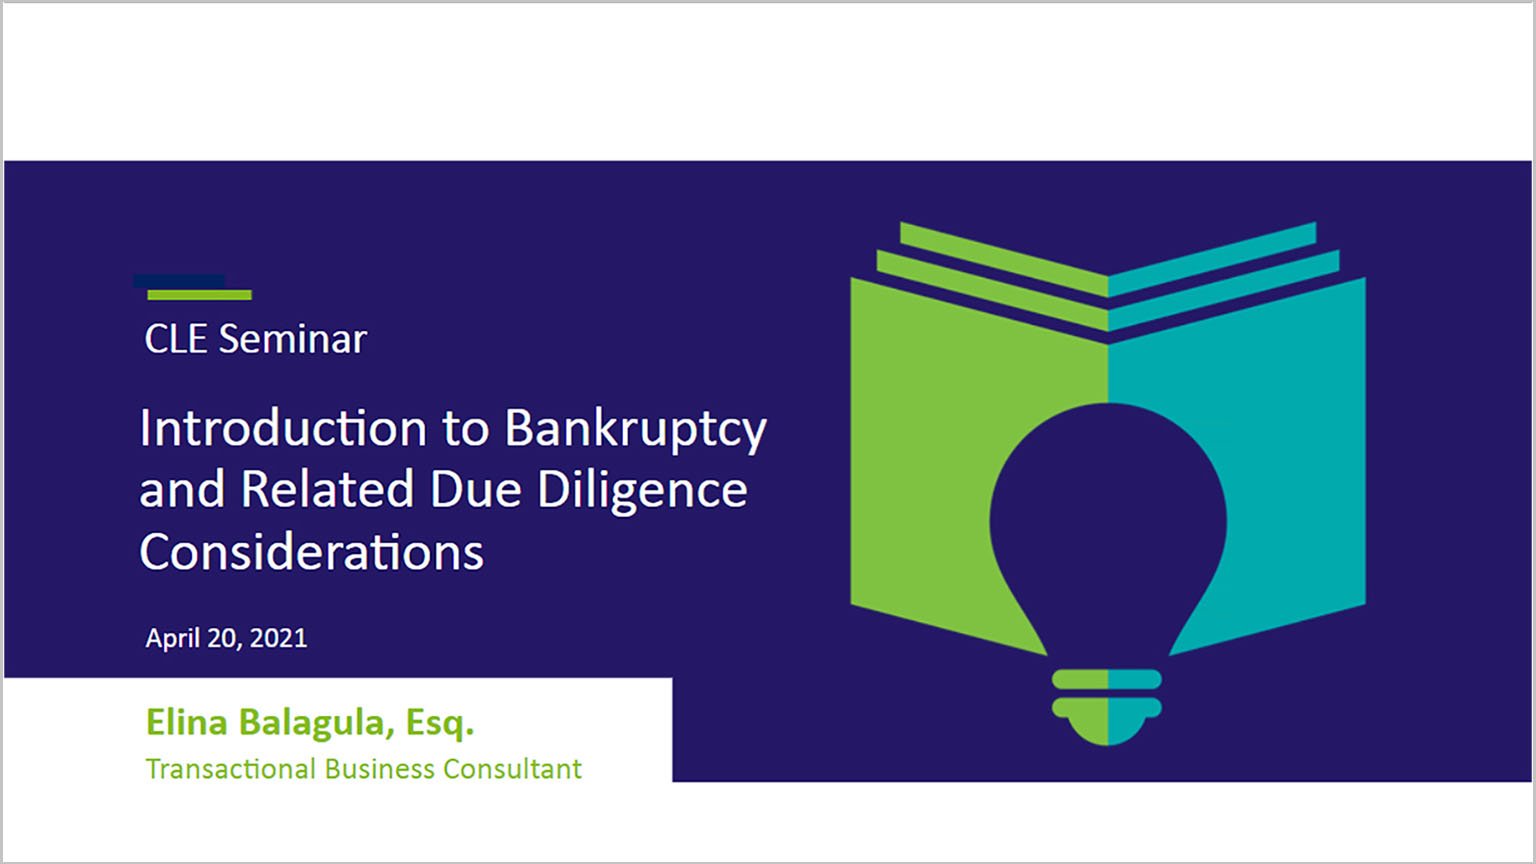 CLE Webinar: Introduction to Bankruptcy and Related Due Diligence Considerations